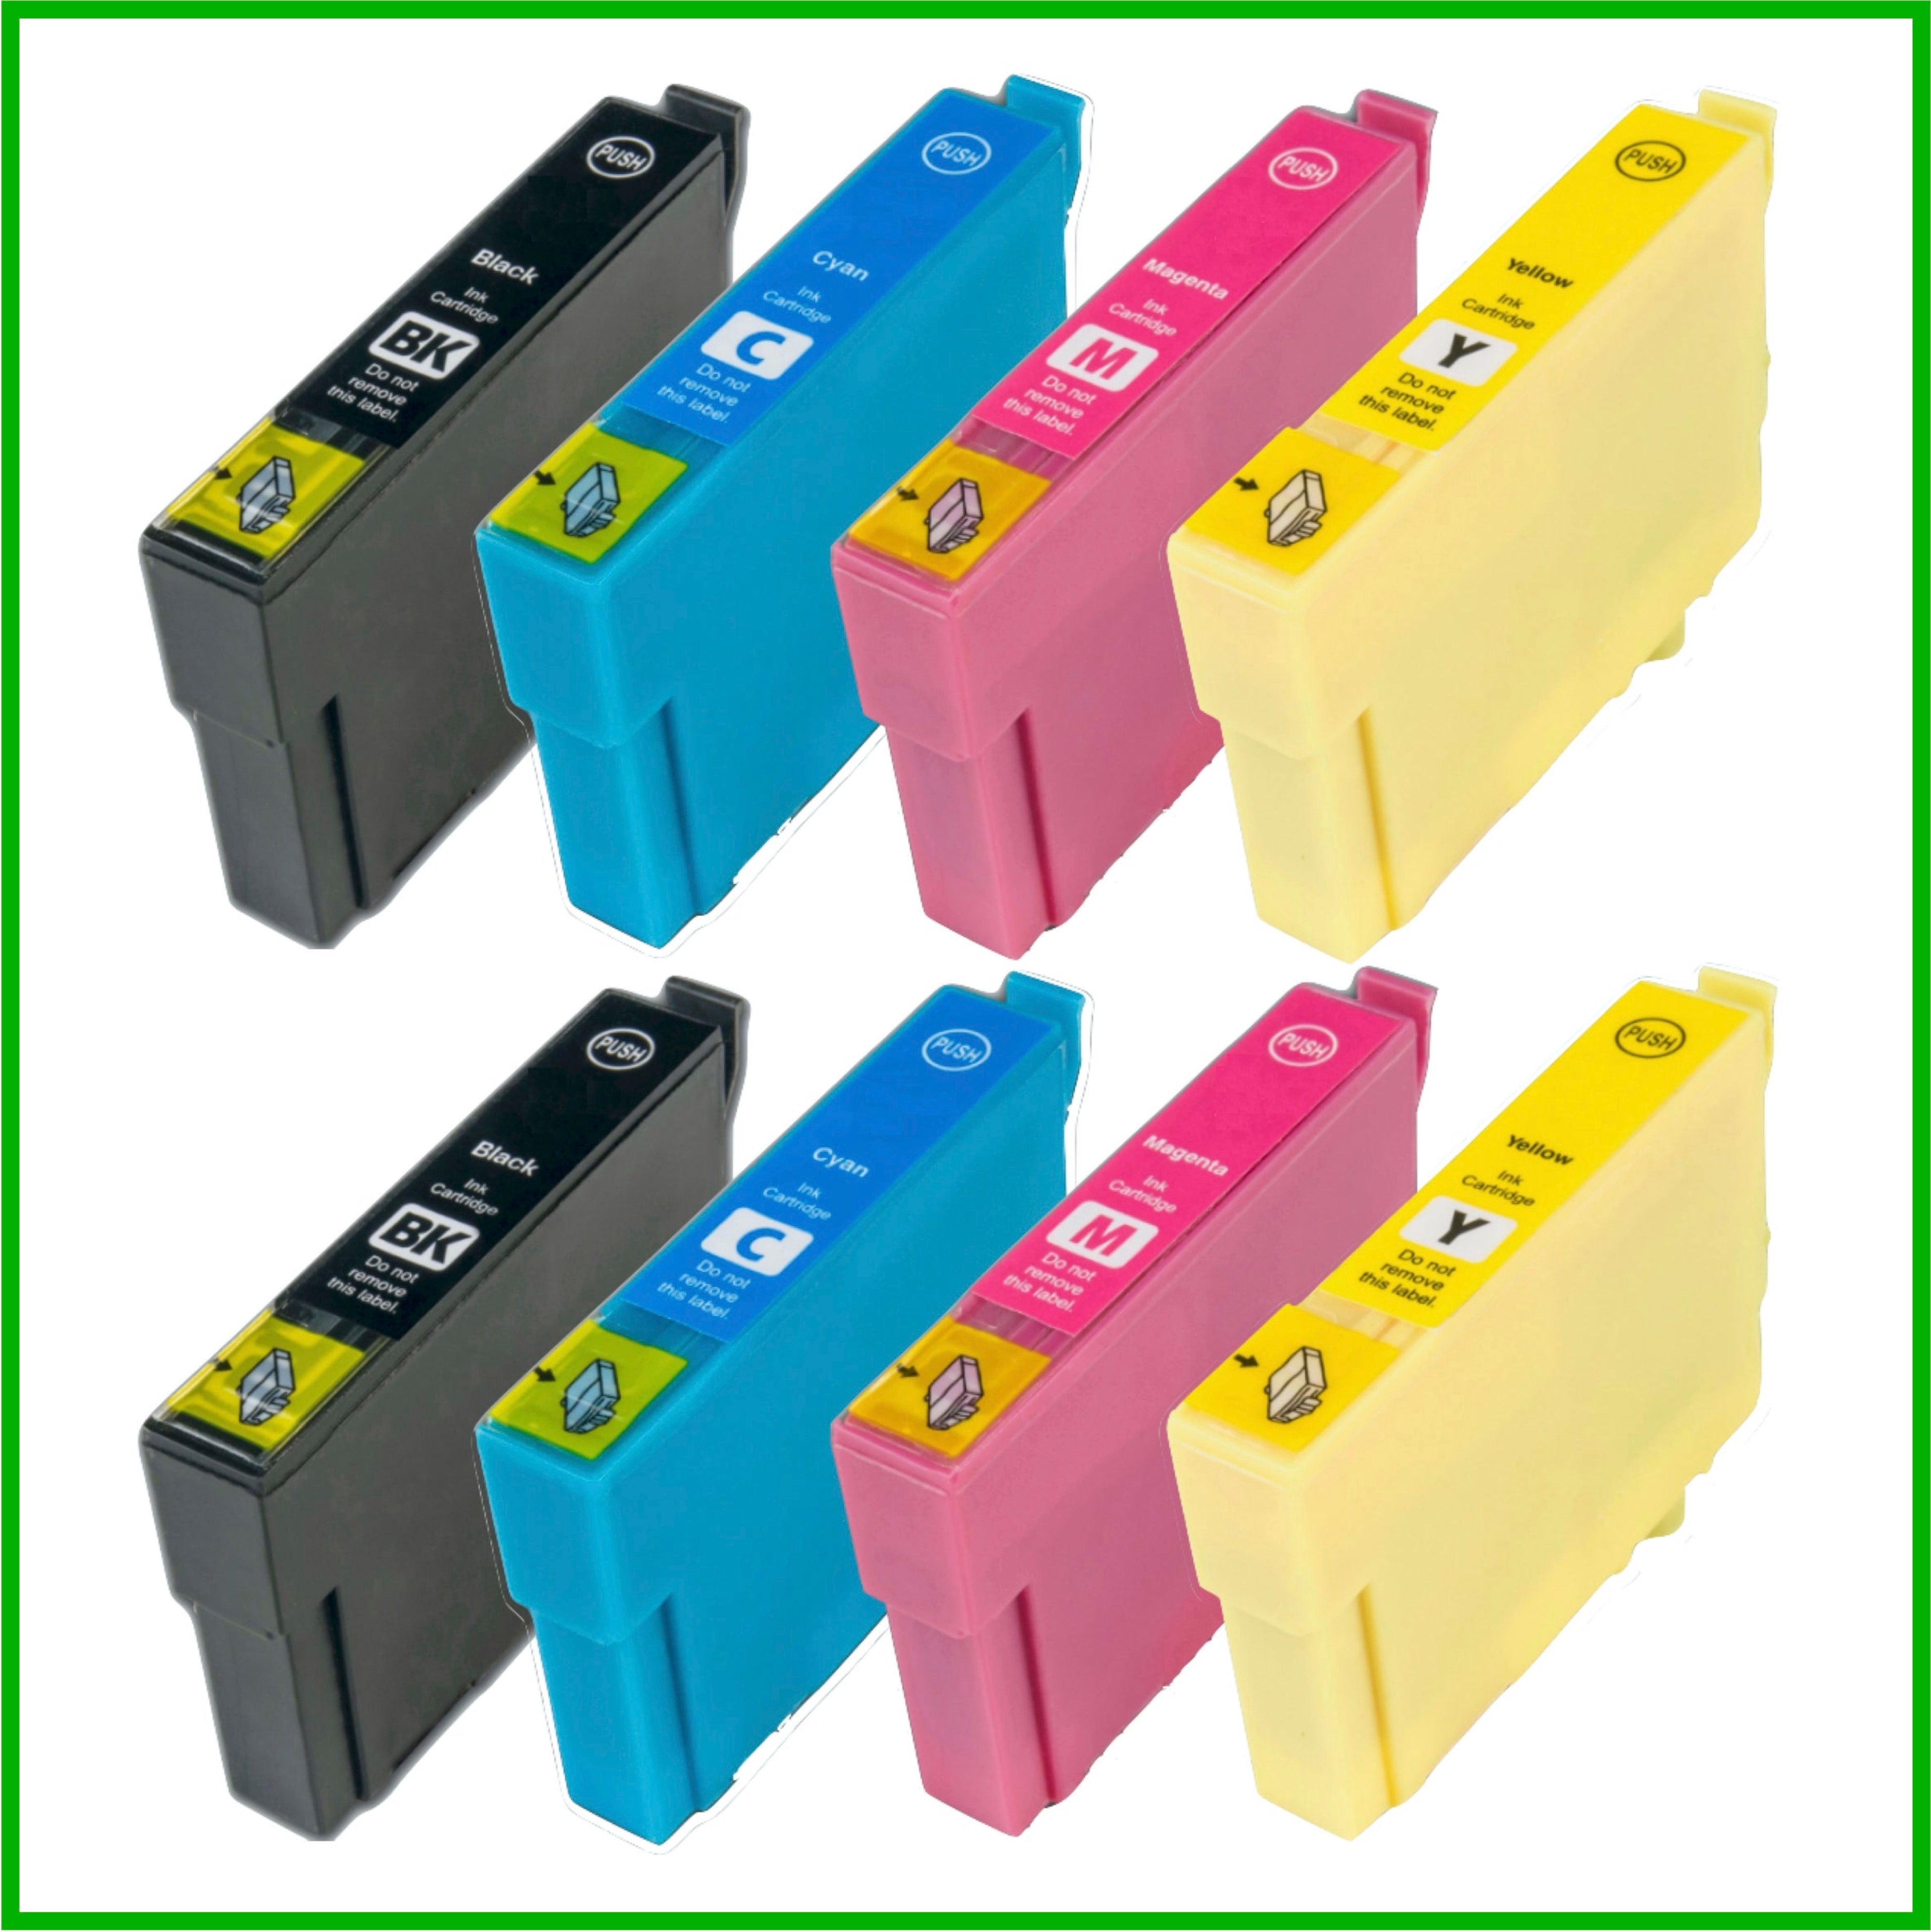 T1295 Multipack Ink Cartridges Replacement For T1291 T1292 T1293 T1294  Compatible For Epson Sx435w Sx235w Wf-3520 Wf-3540